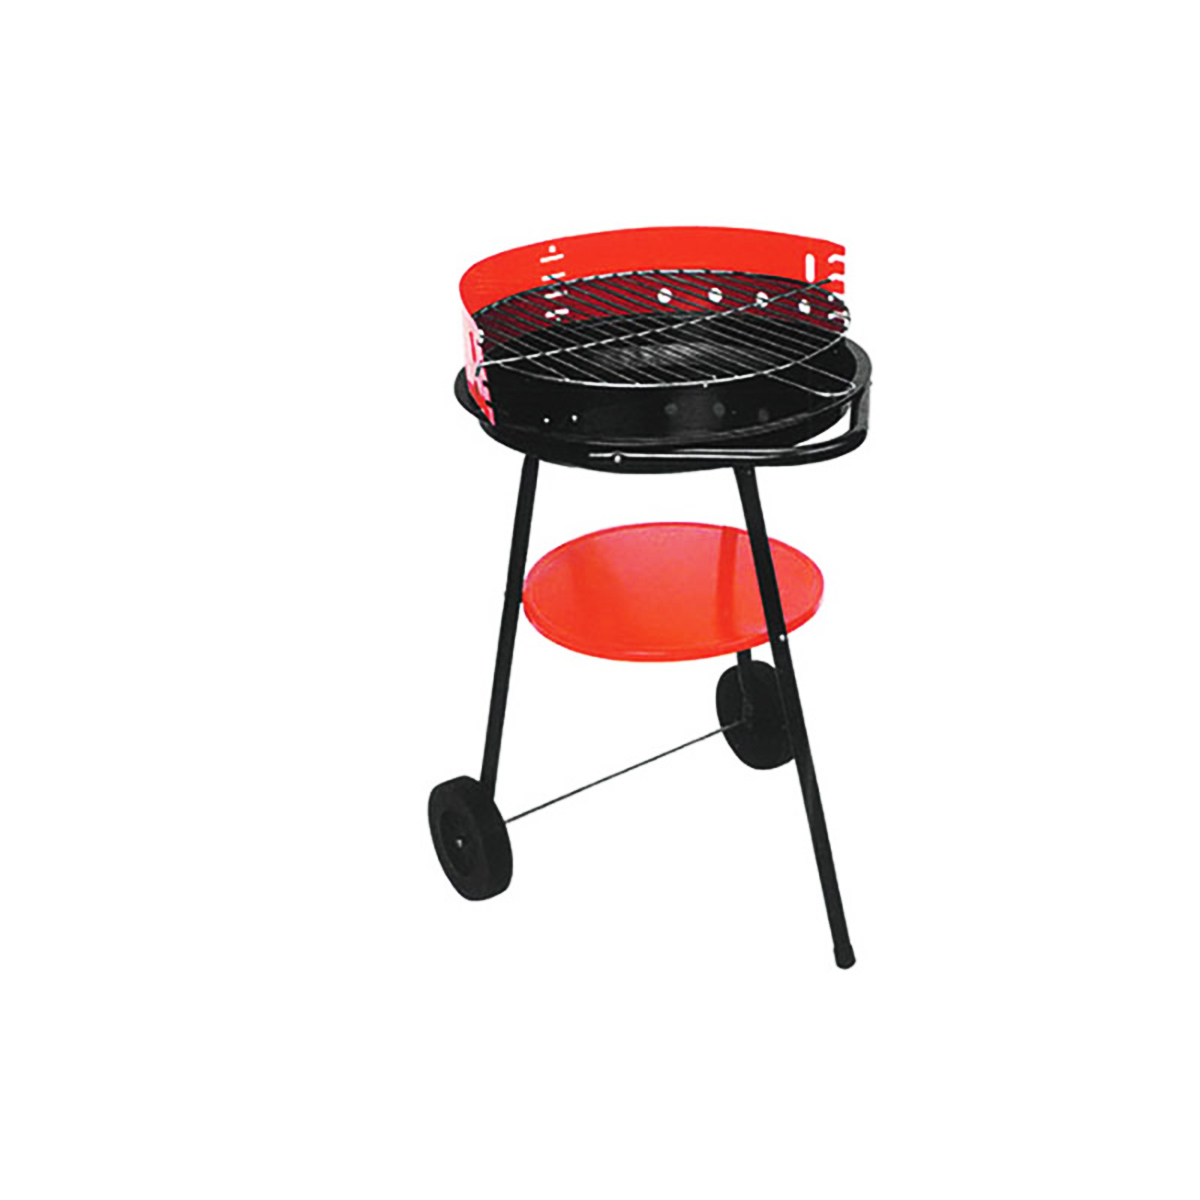 Iron-Charcoal-Meat-Grill-BBQ-Barbeque-with-wheels-Outdoor-Camping-Picnic-Stove-1754134